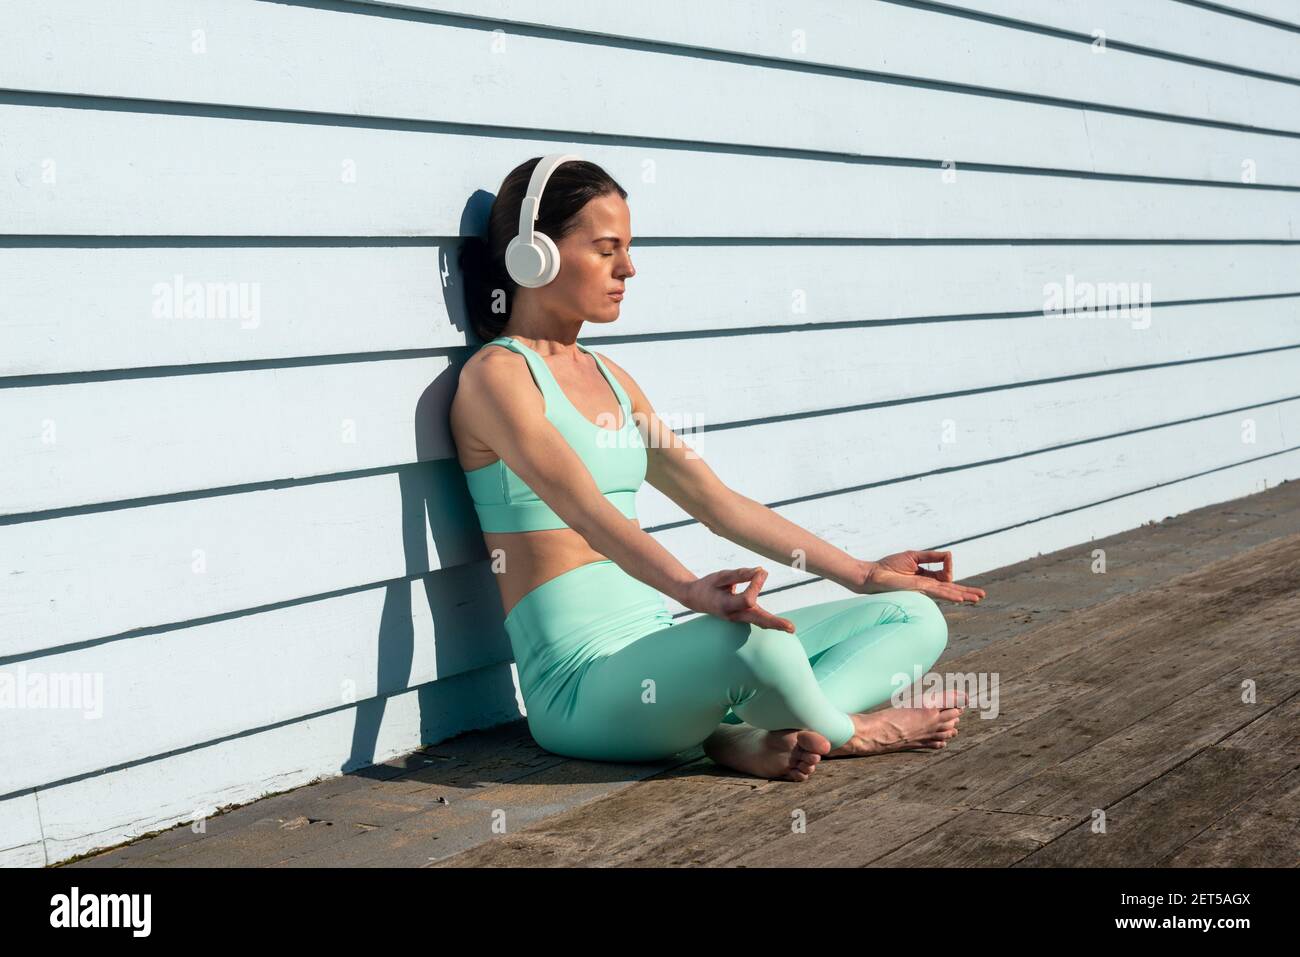 Woman meditating practicing yoga sitting in the sun wearing headphones with a blue clapboard background. Stock Photo